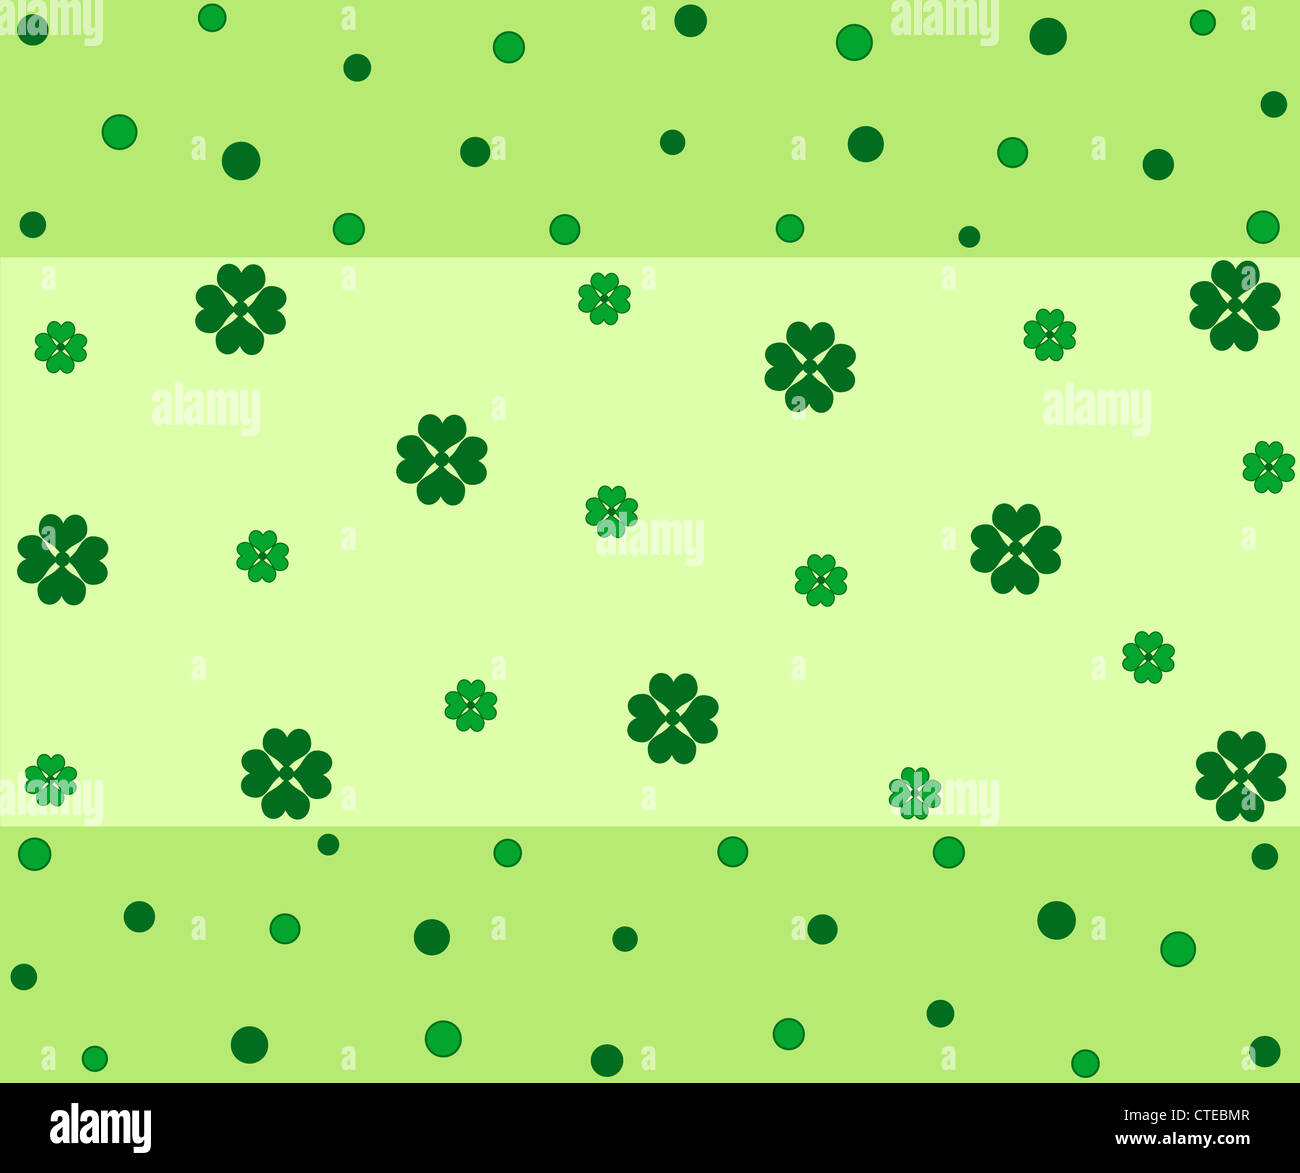 Green good luck clovers and polka dots pattern Stock Photo